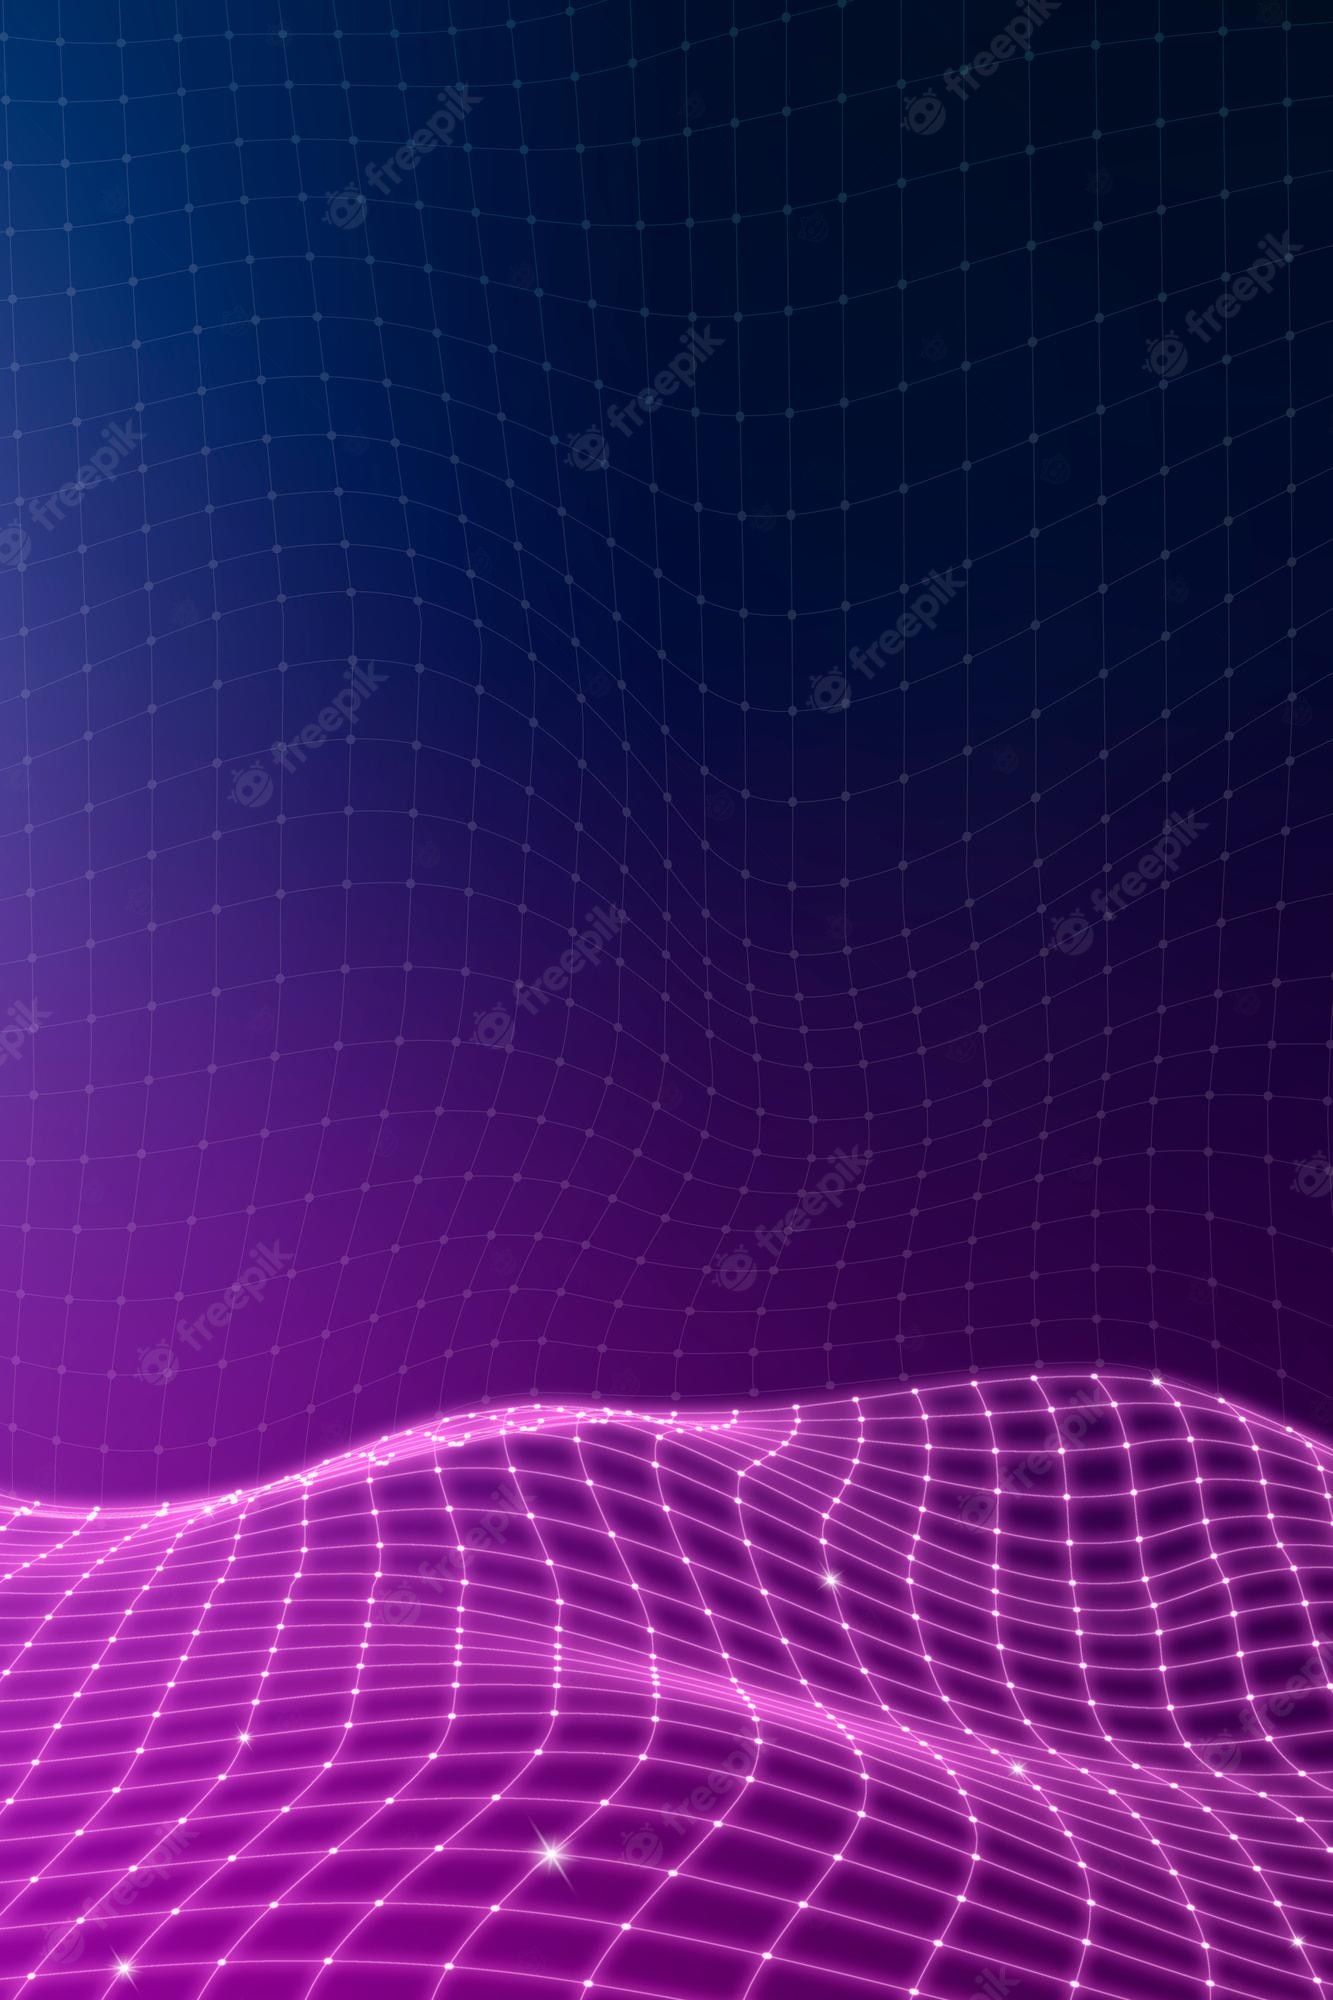 Free Vector. Purple 3D abstract wave pattern background